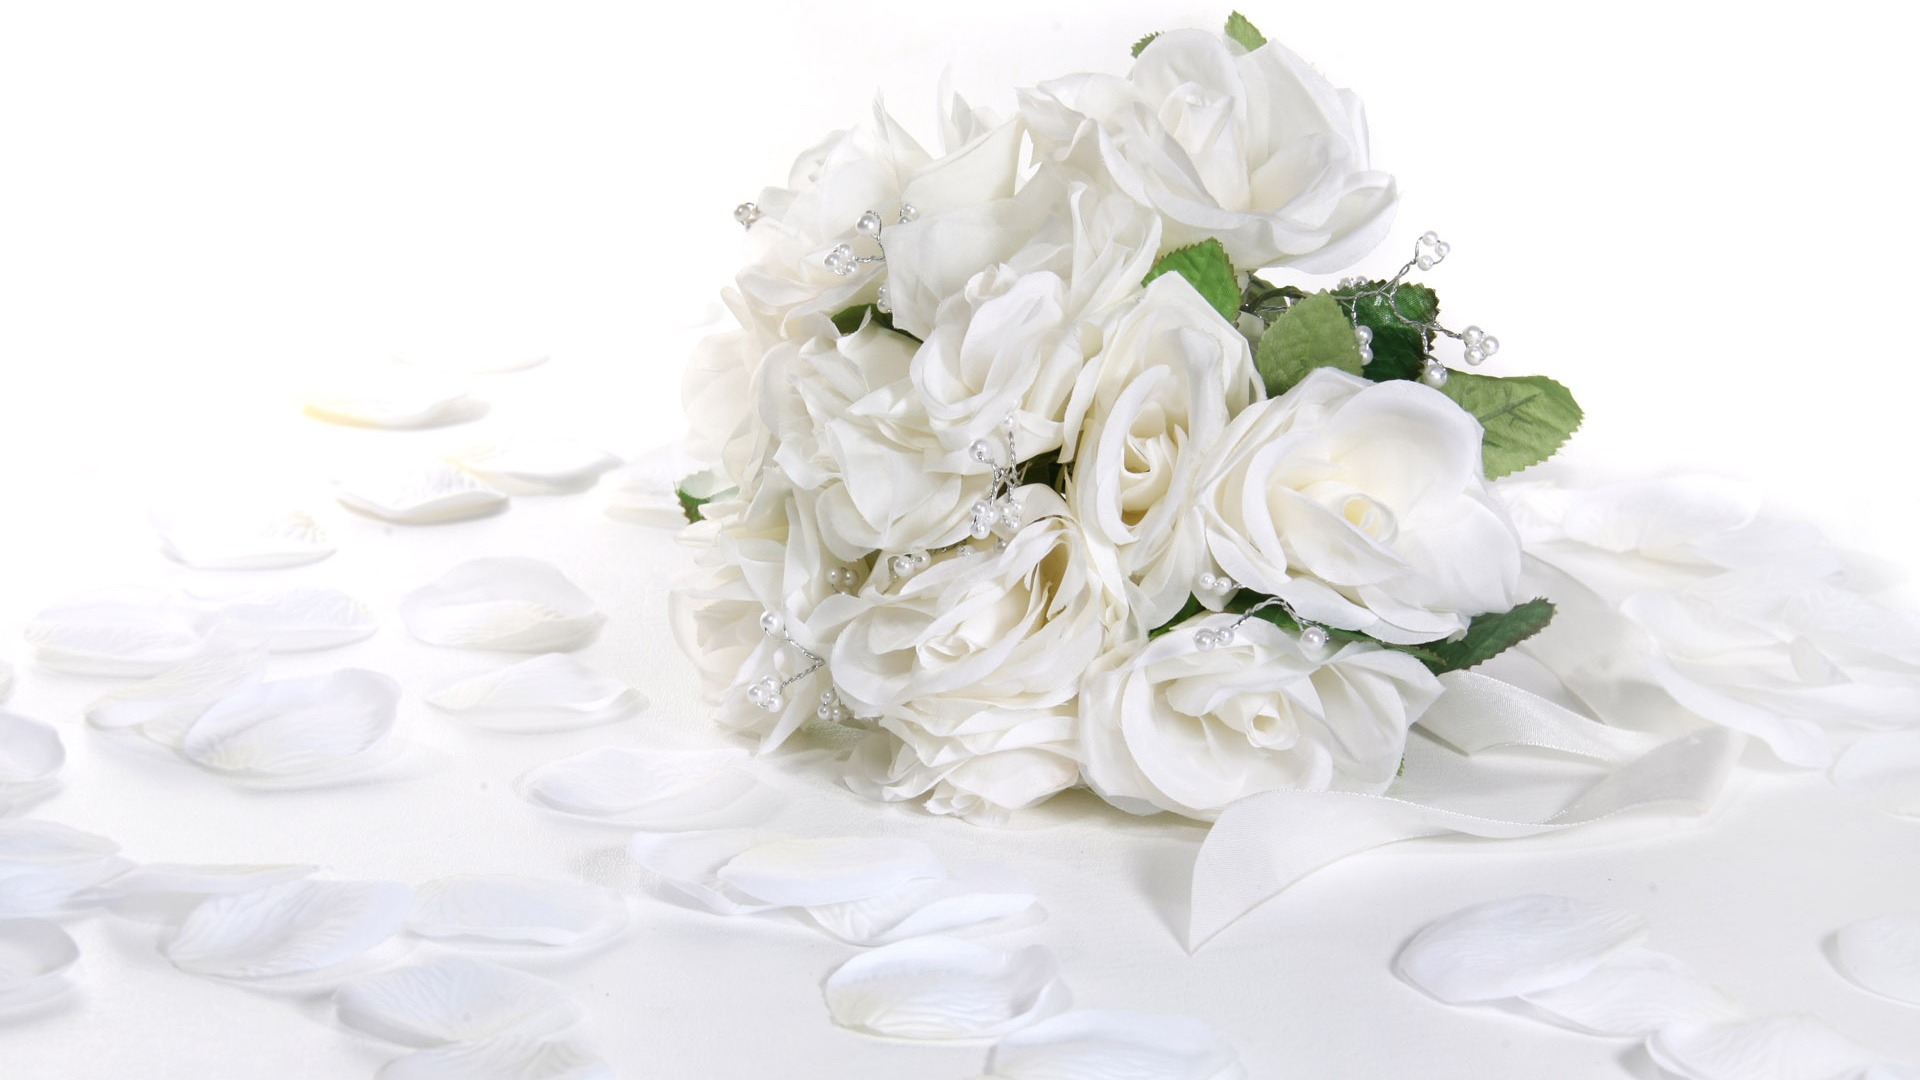 Weddings and Flowers wallpaper (2) #2 - 1920x1080